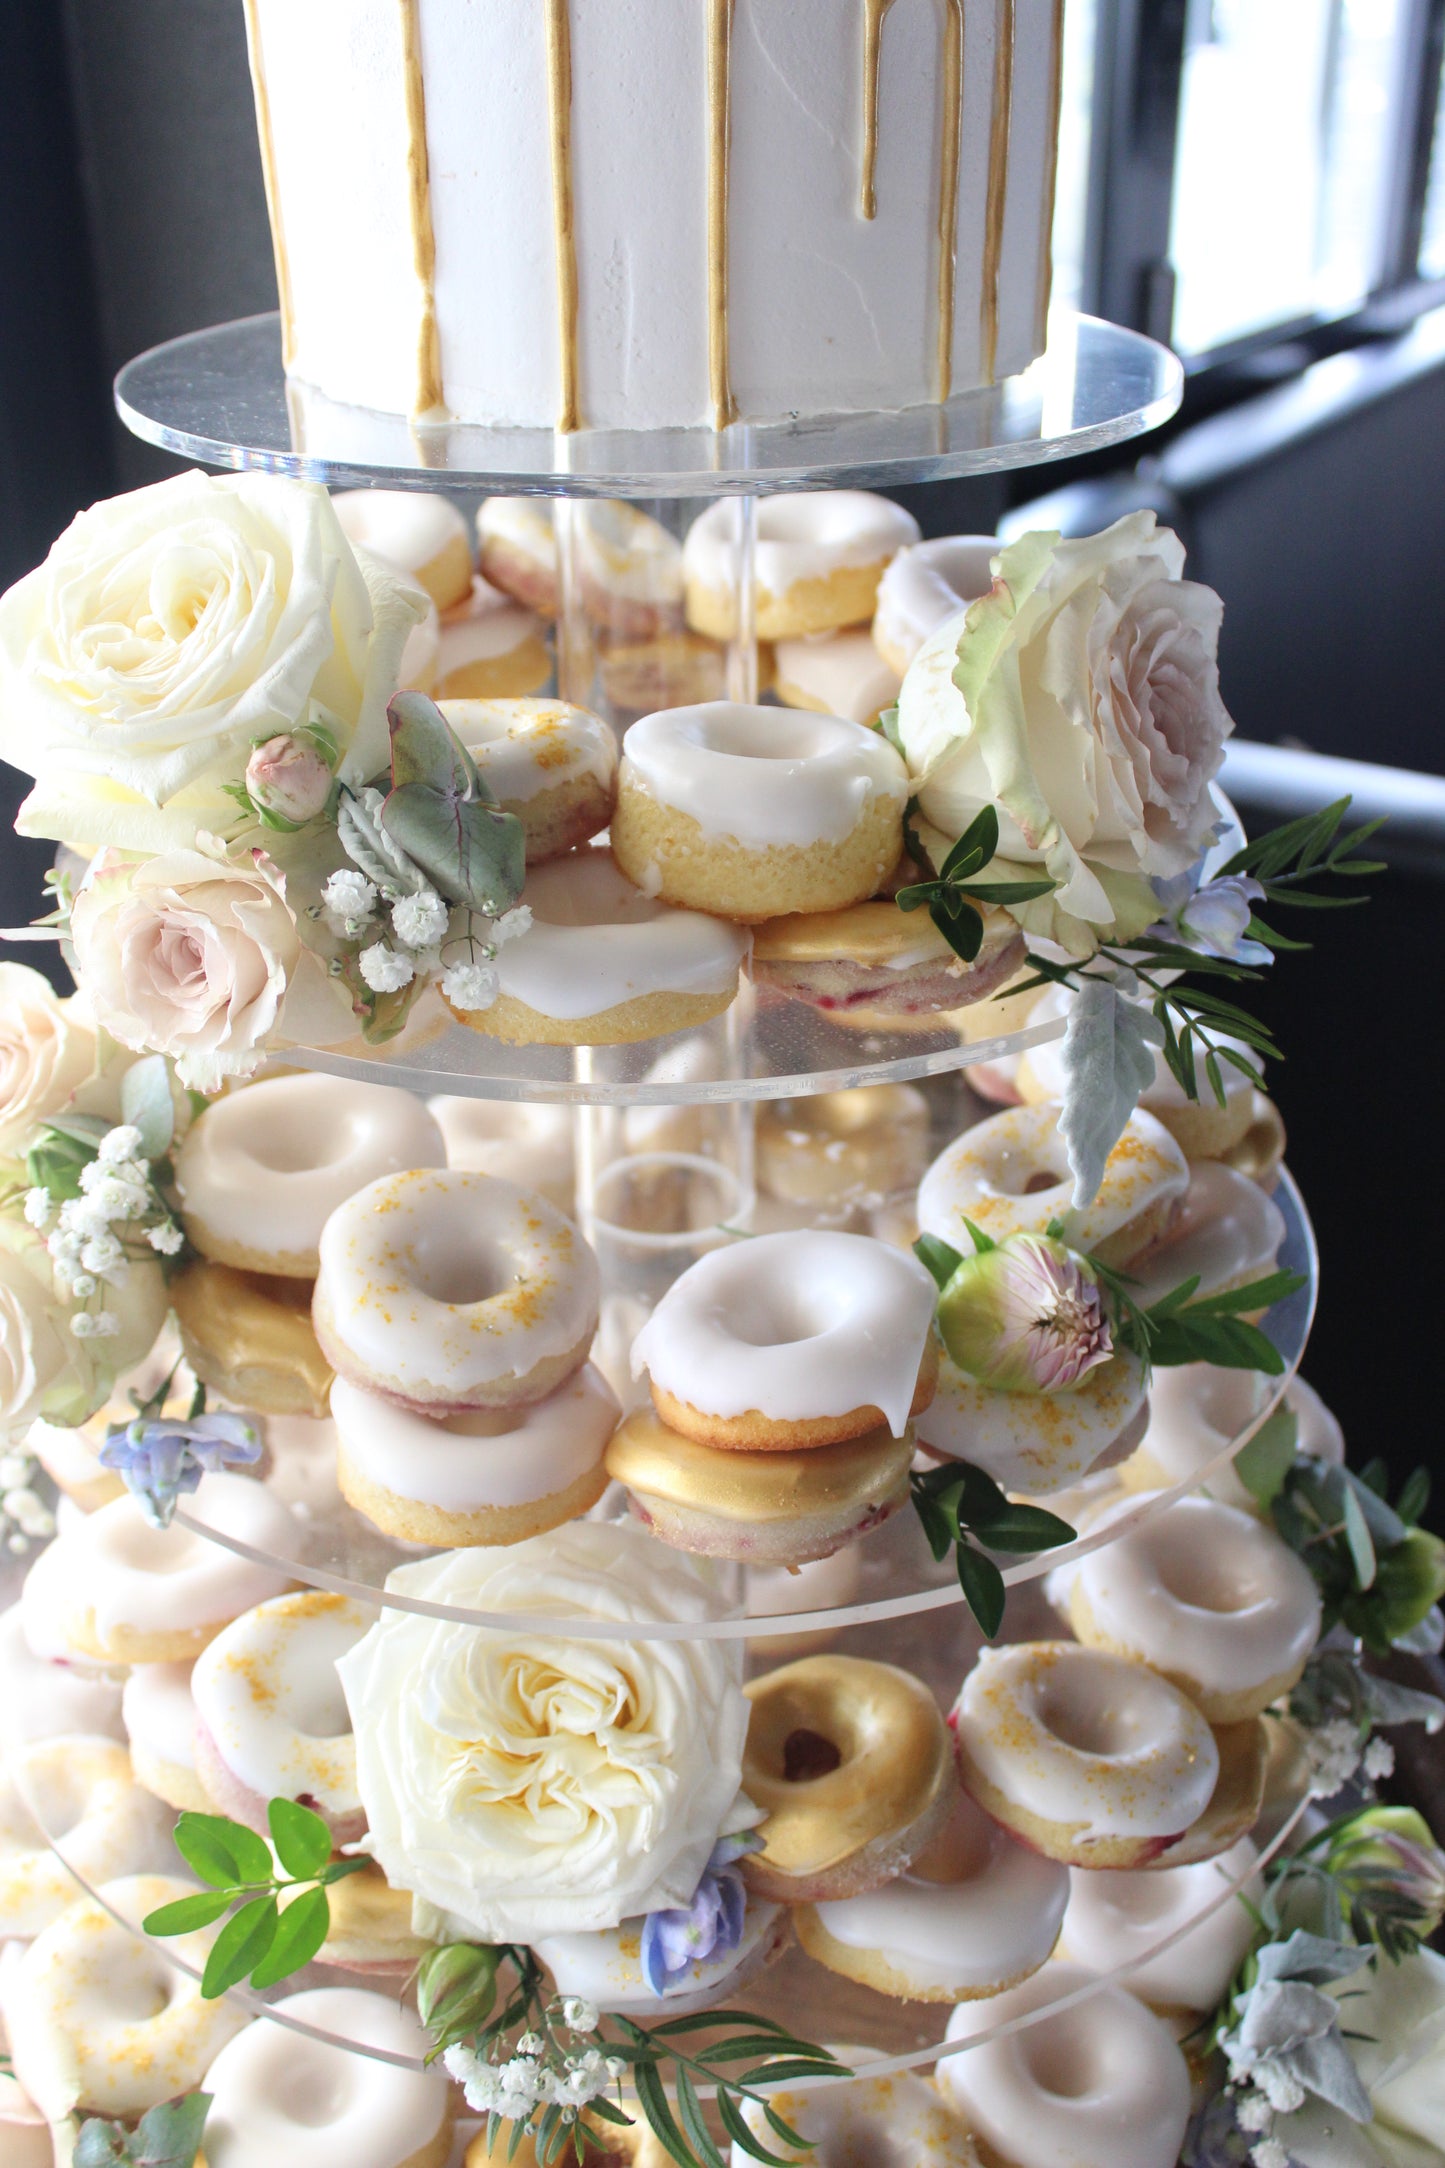 Donut Tower with Cutting Cake in Gold & White